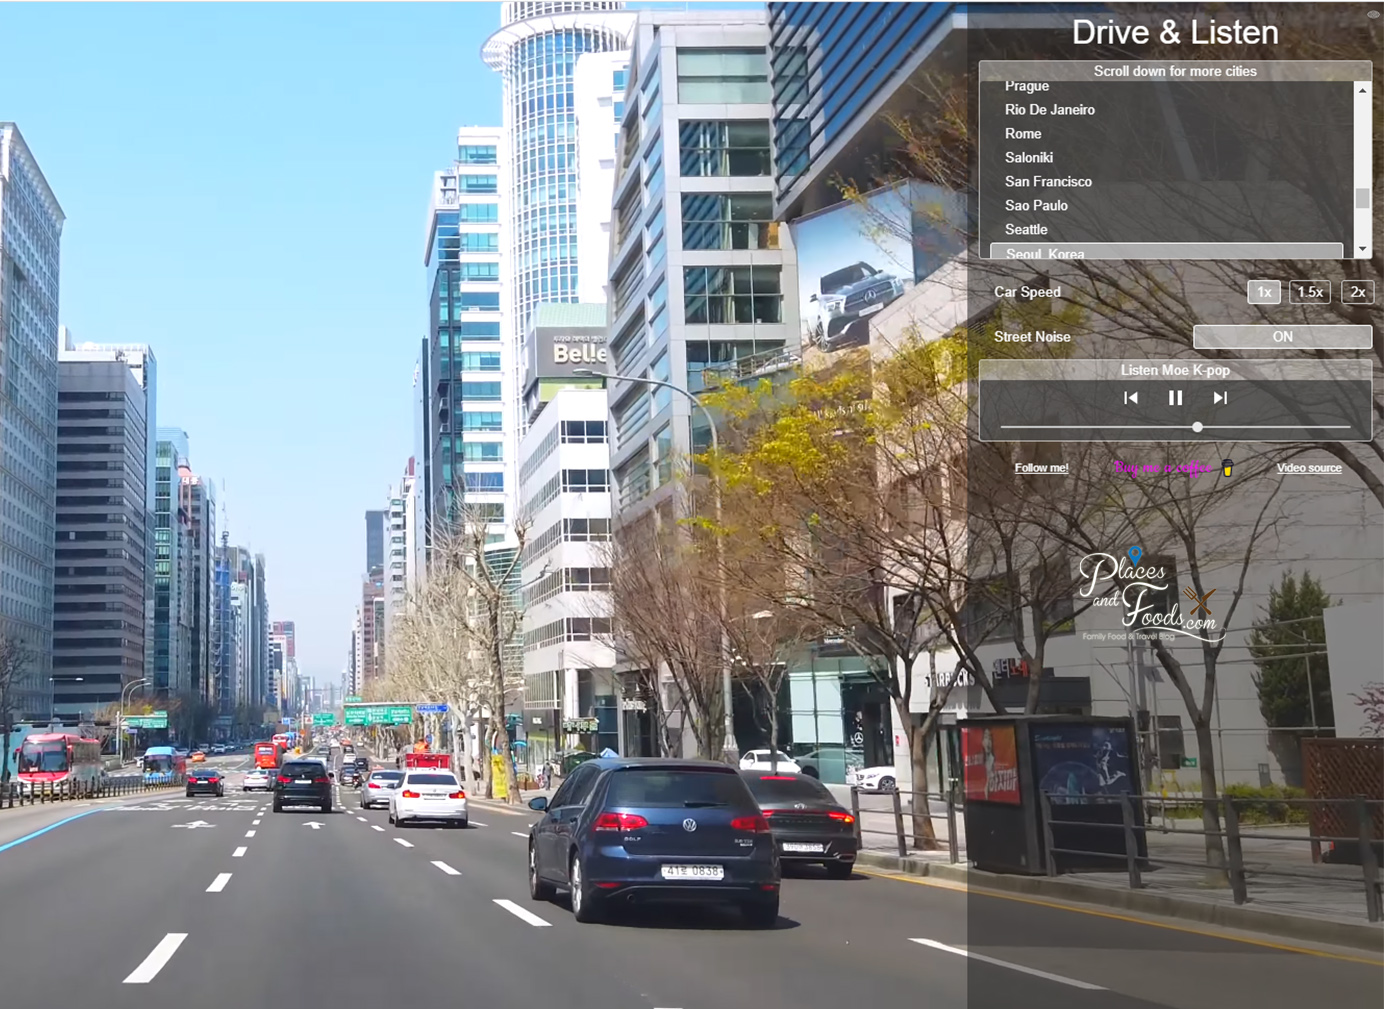 Drive and Listen is your virtual gateway to the roads of the world